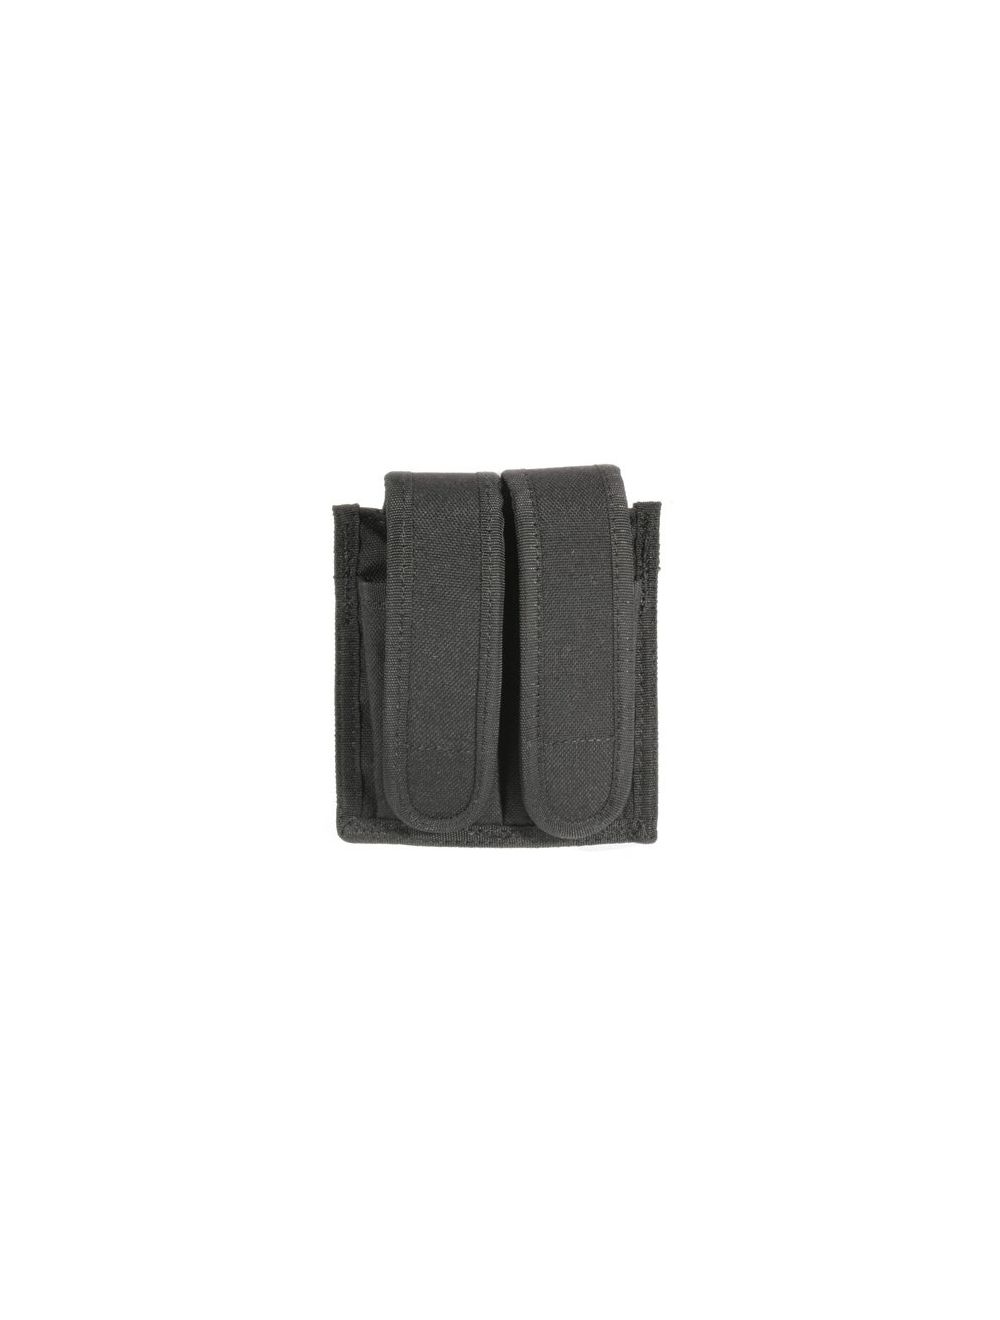 Universal Double Mag Case